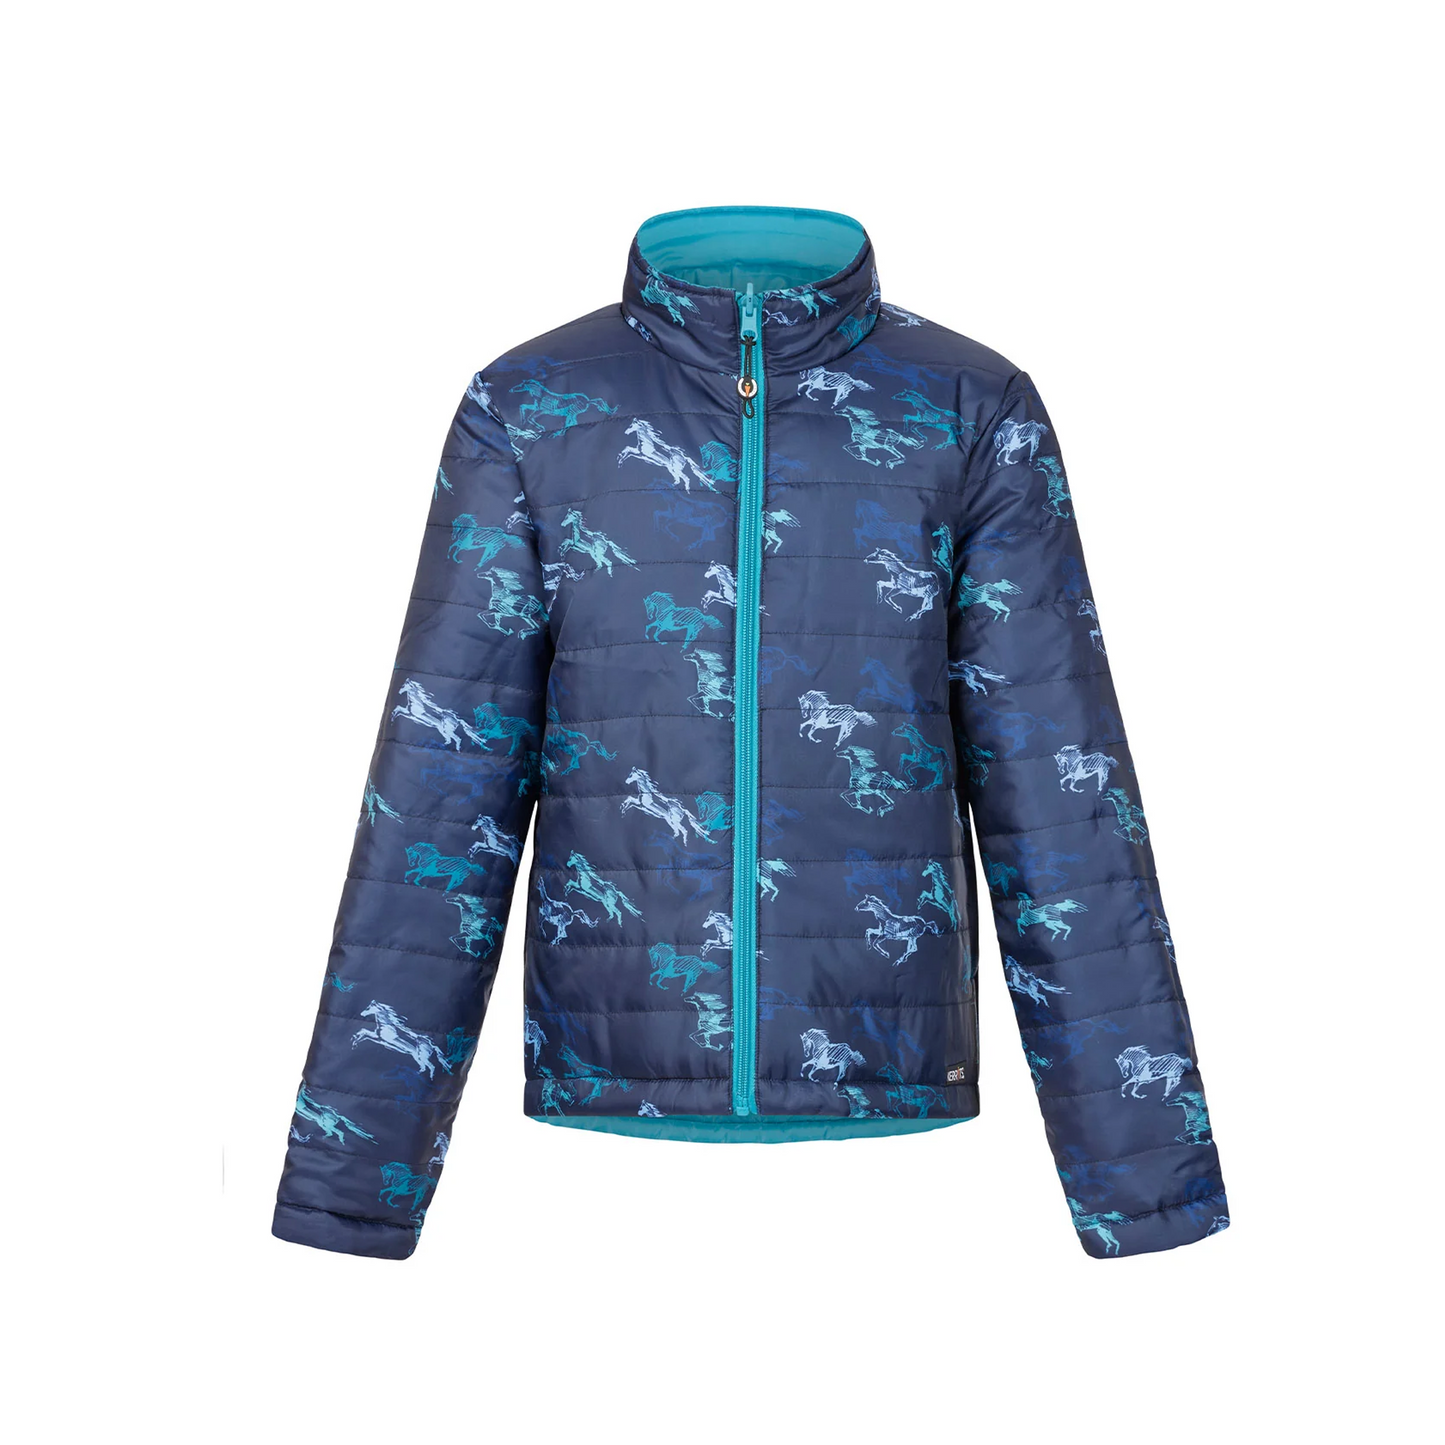 Kids Pony Tracks Reversible Quilted Riding Jacket